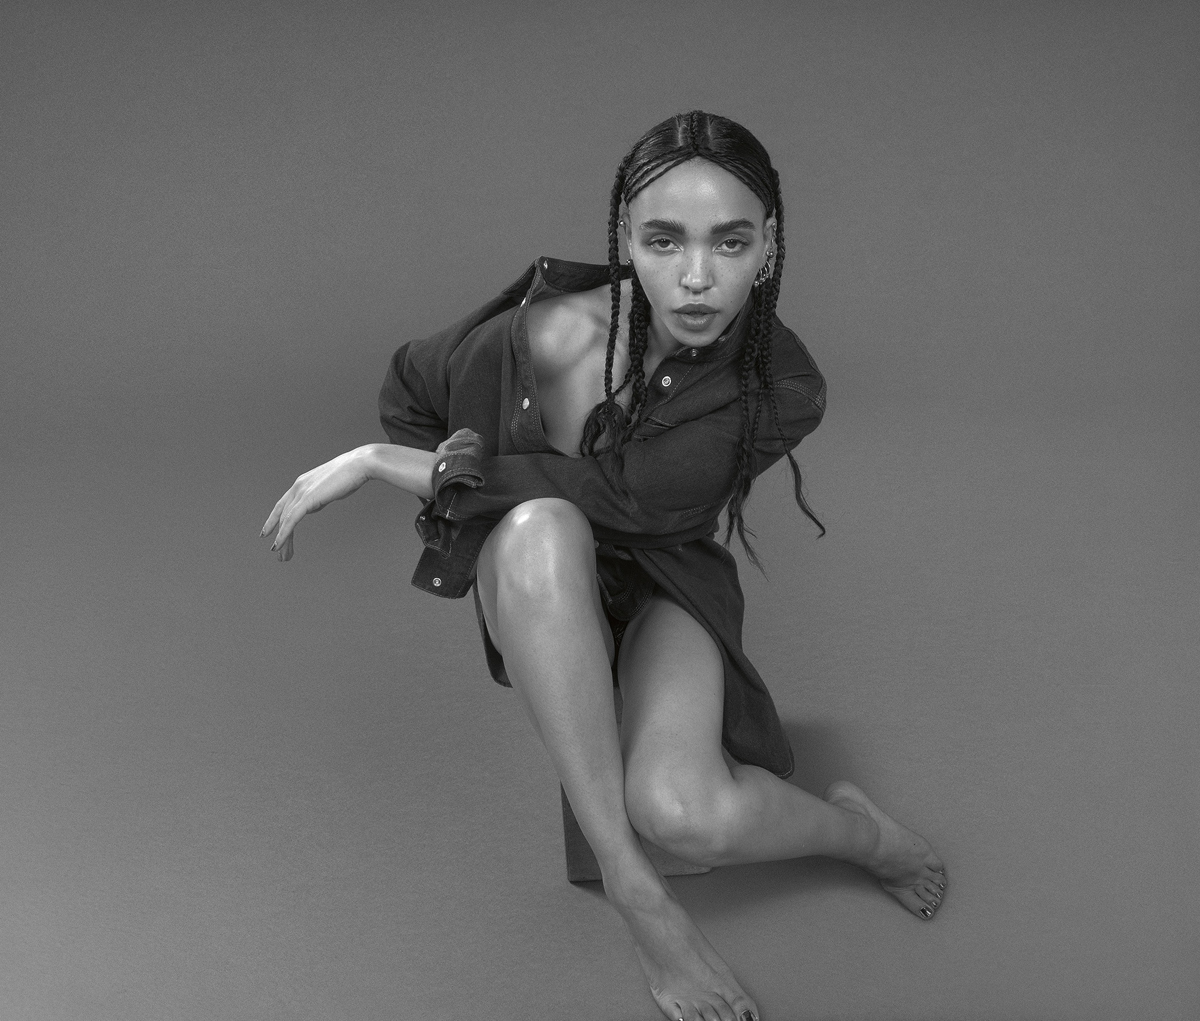 FKA Twigs Nude Calvin Klein Ad BANNED After It Was Deemed To ‘Cause Serious Offense’